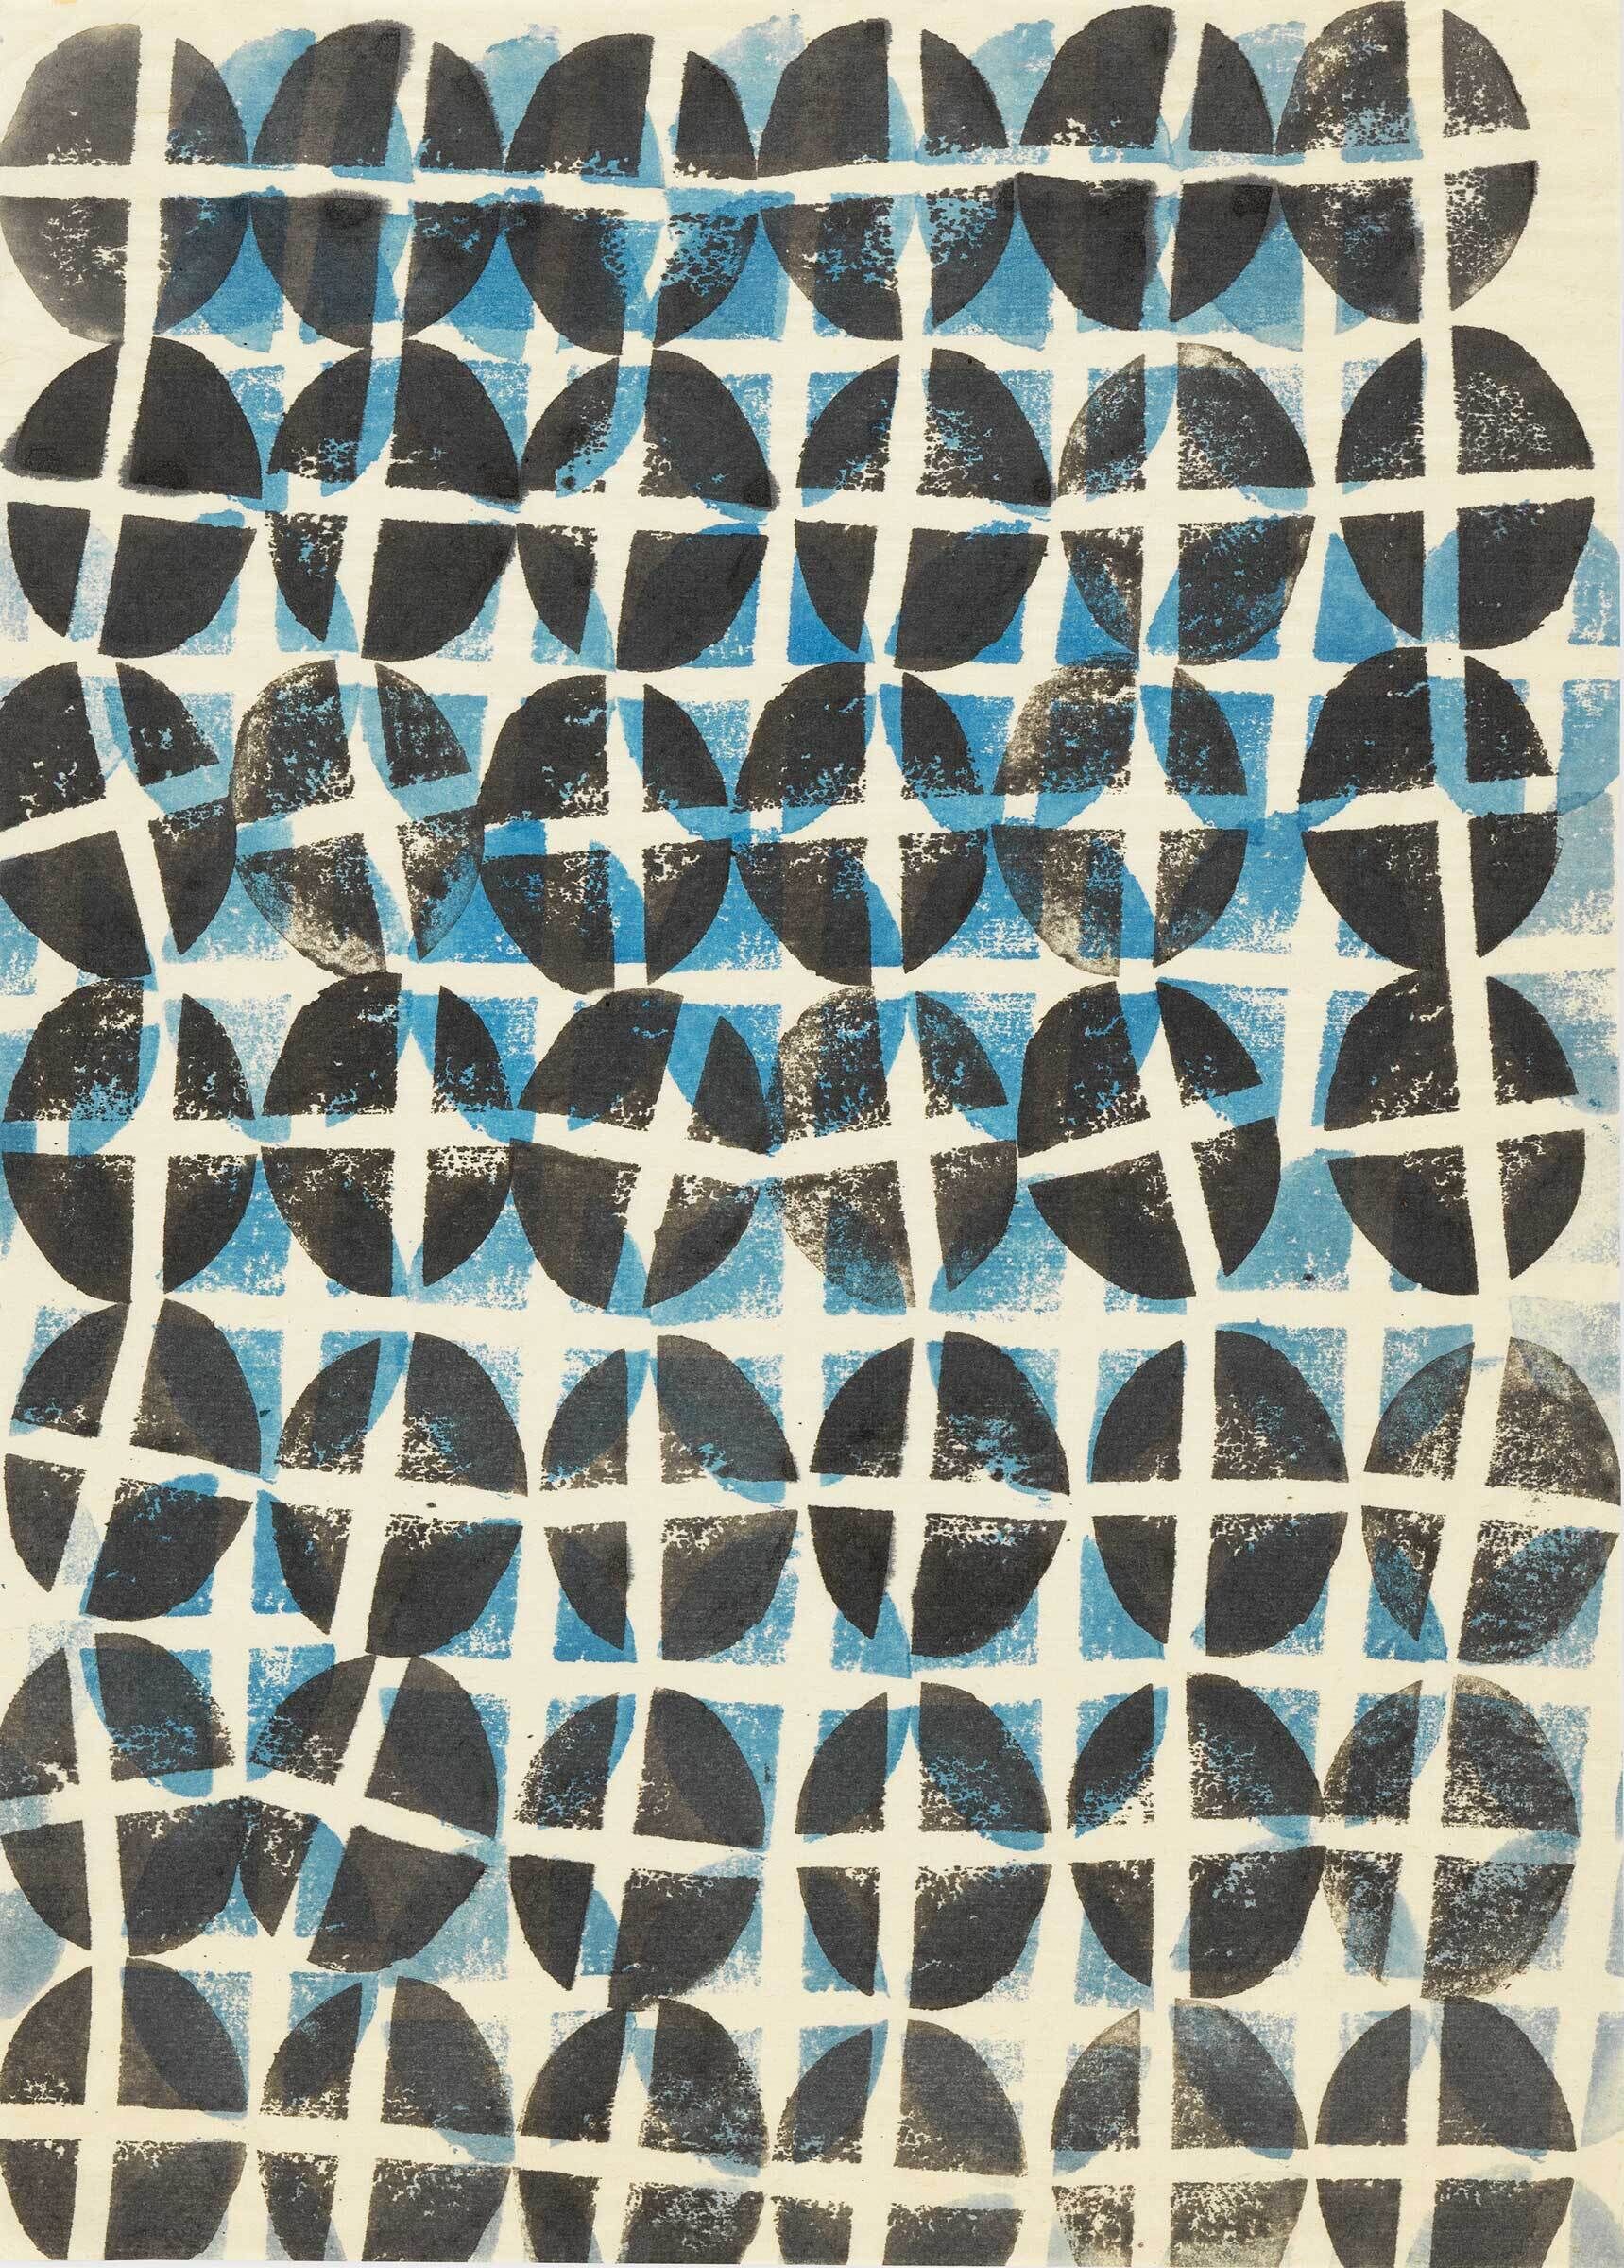 Seven rows of a repeating stamped cross within an oval, overlapping horizontally in blacks and blues